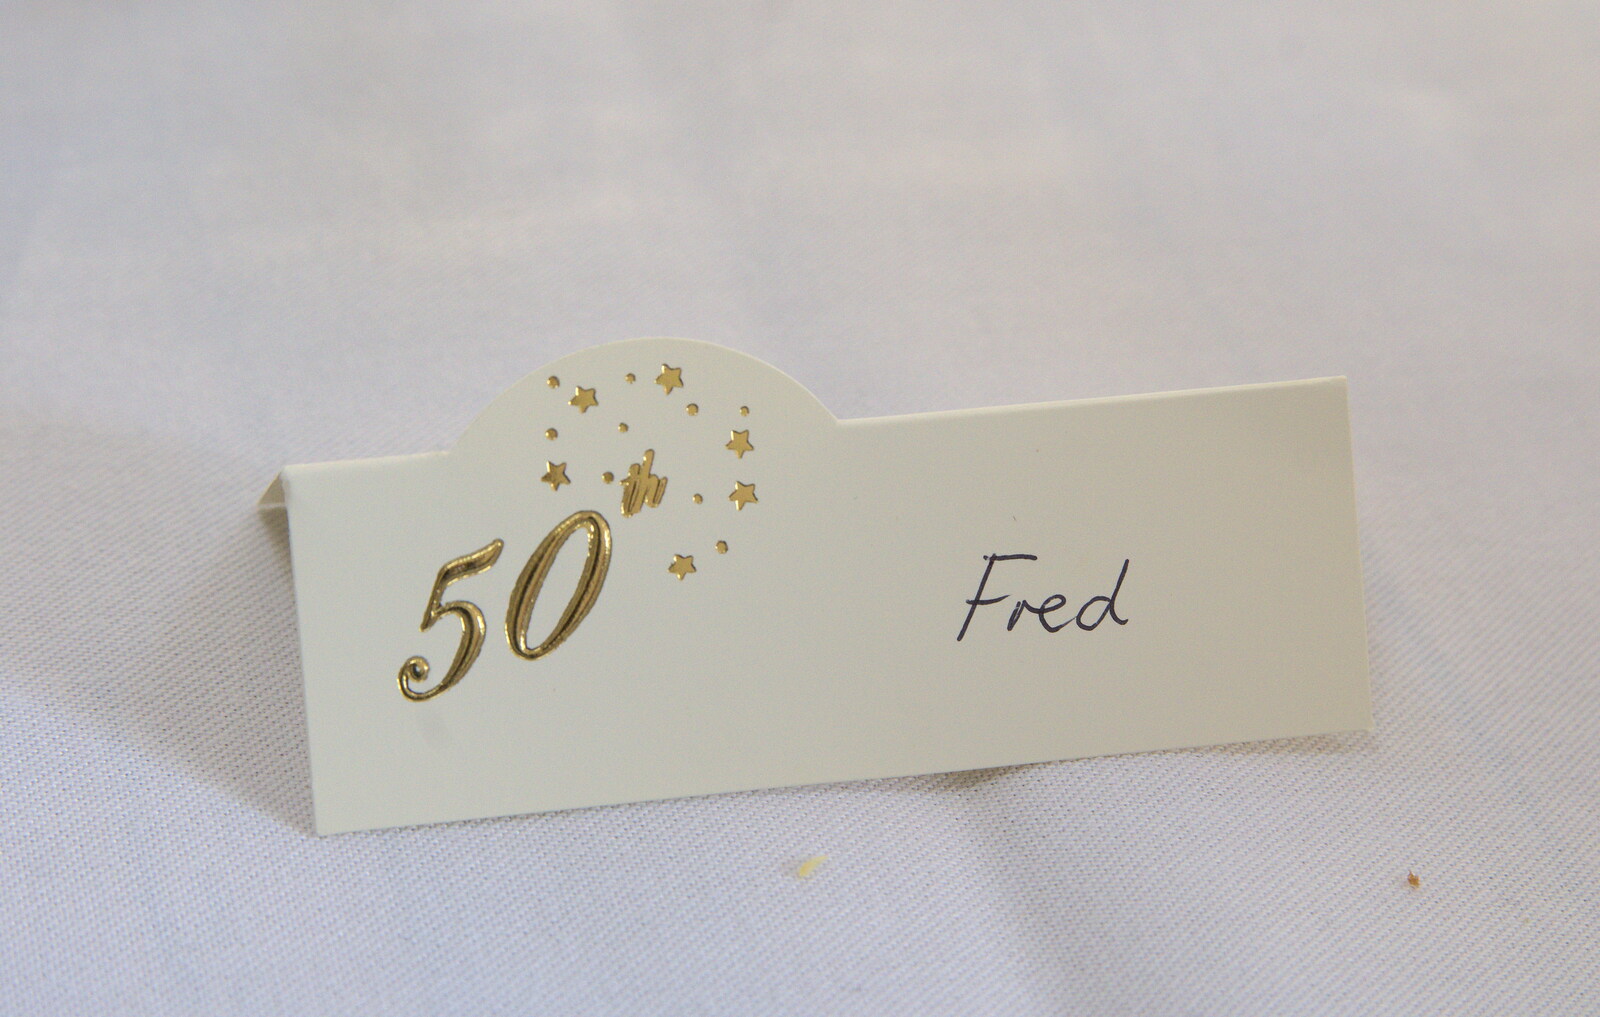 Fred's placename from Bob and Bernice's 50th Wedding Anniversary, Hinton Admiral, Dorset - 25th July 2014